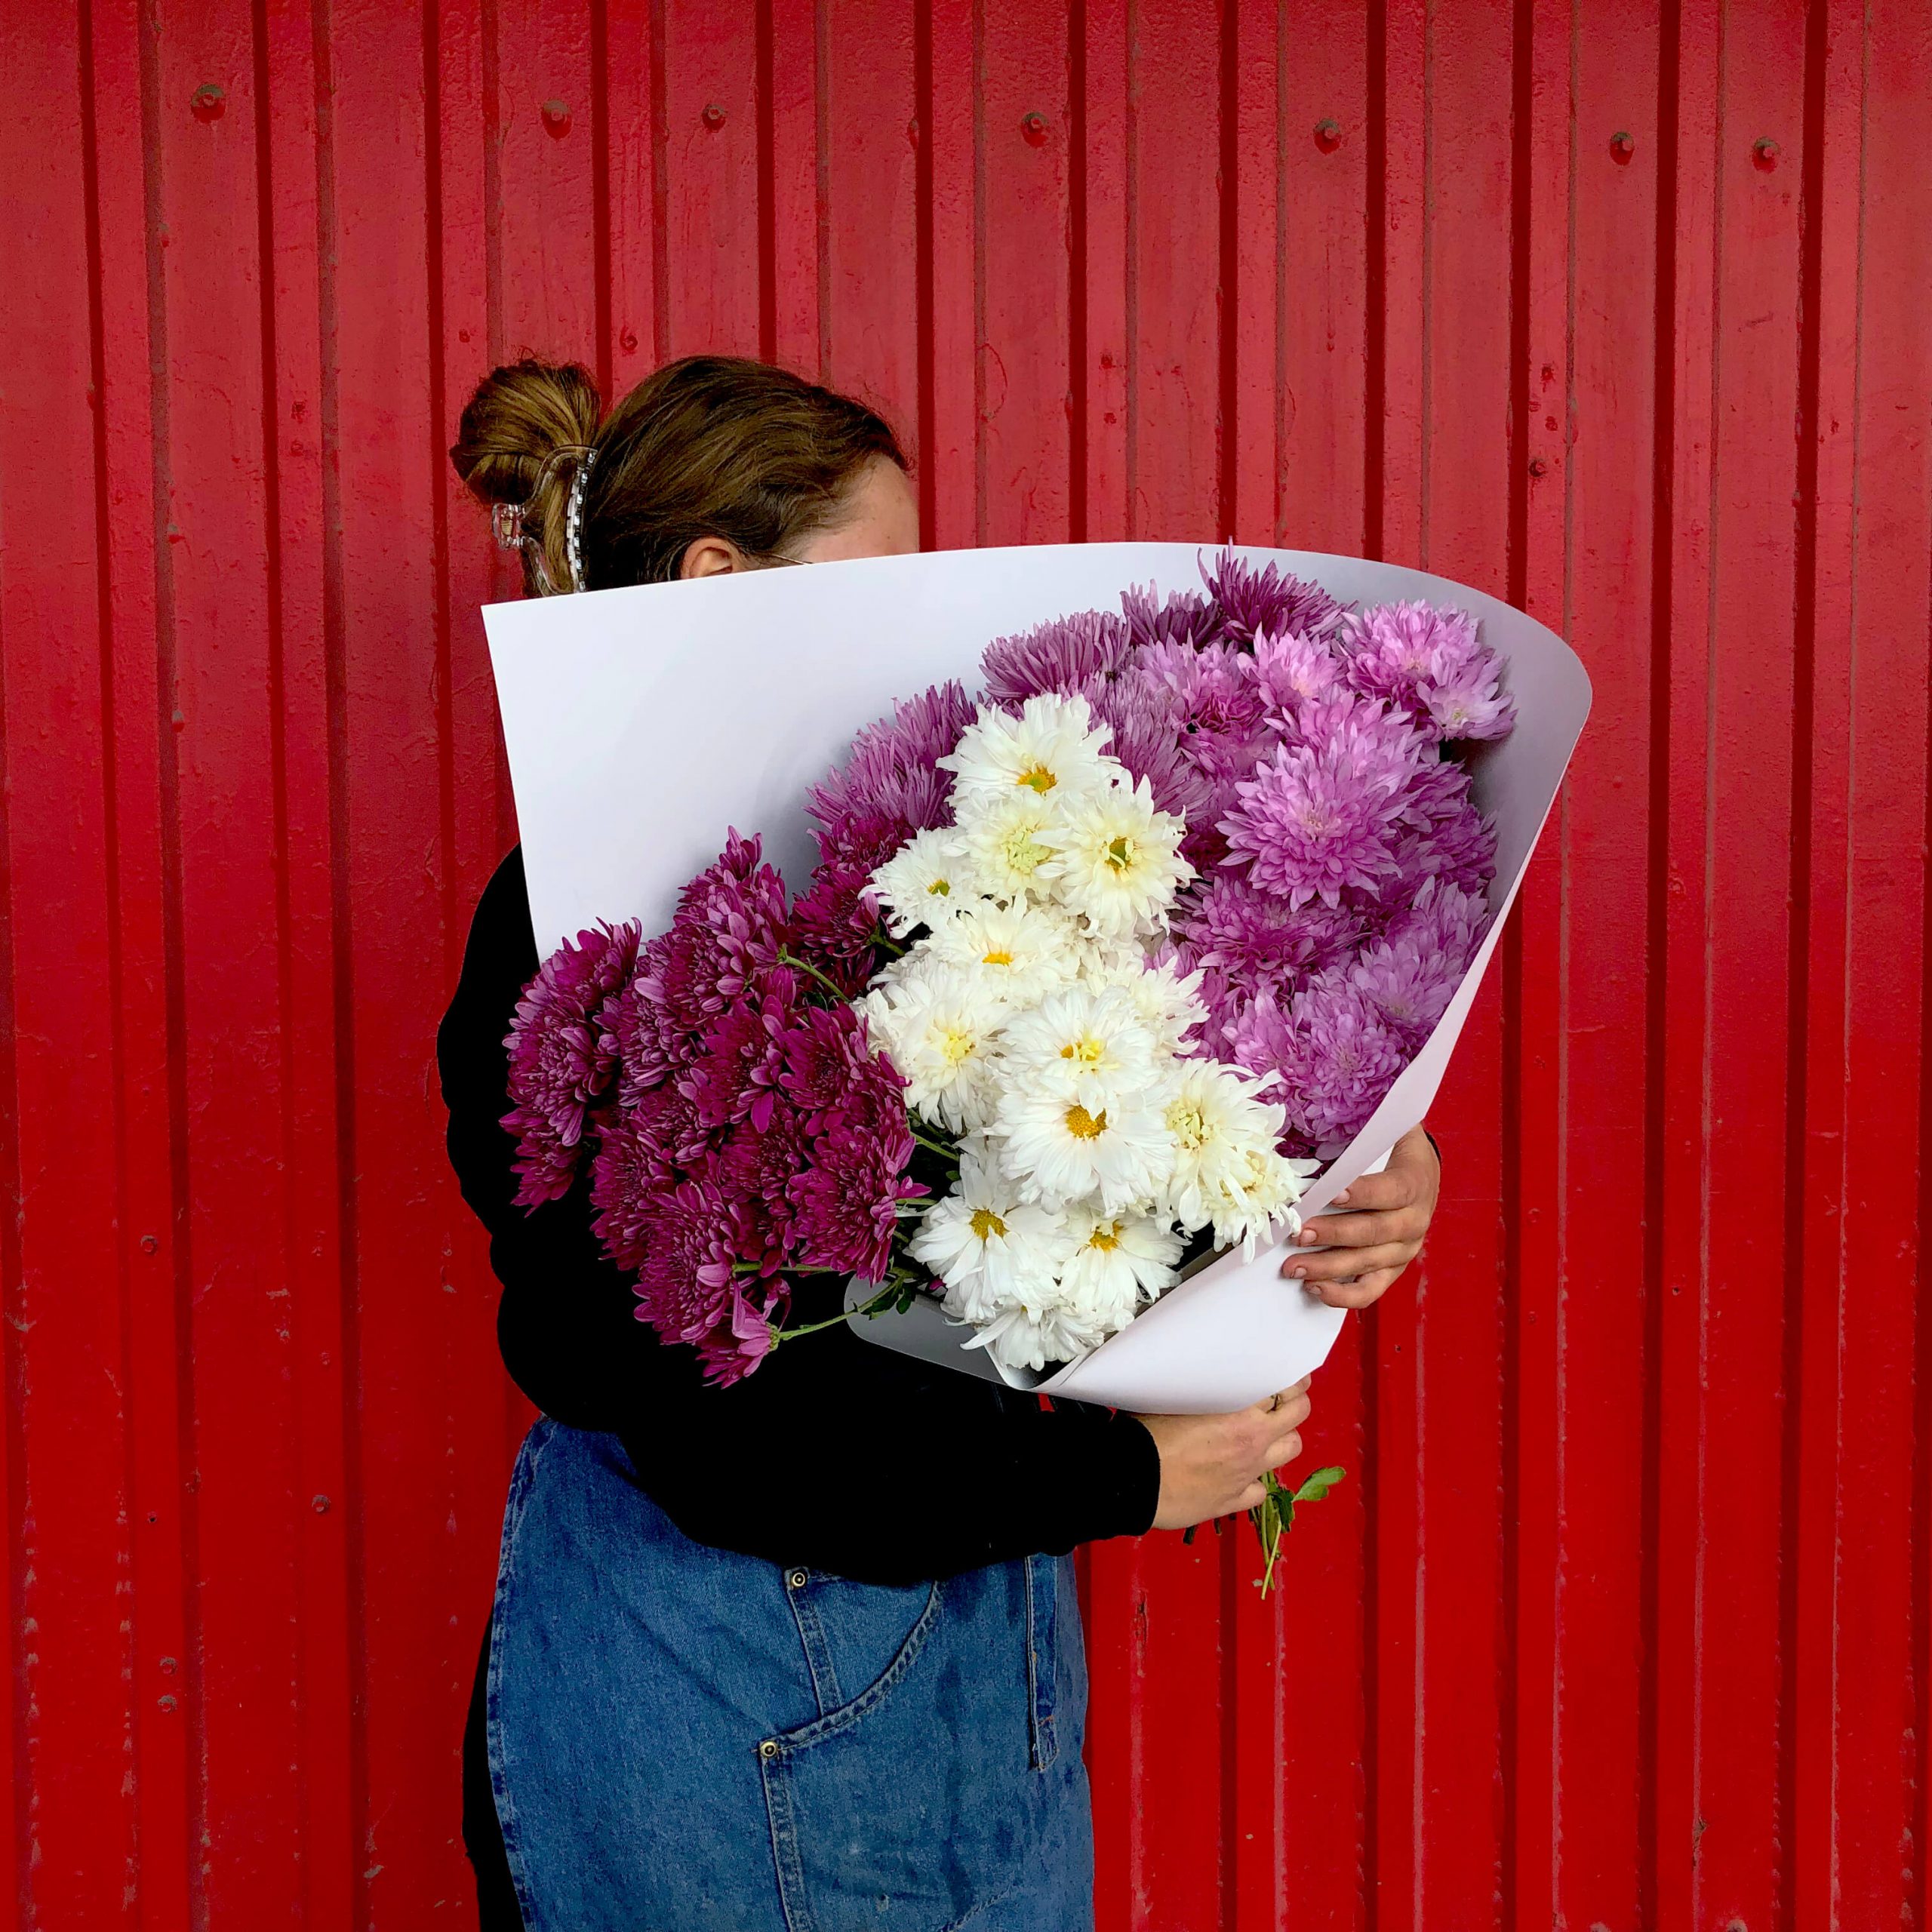 Holding a bouquet of en masse chryssies